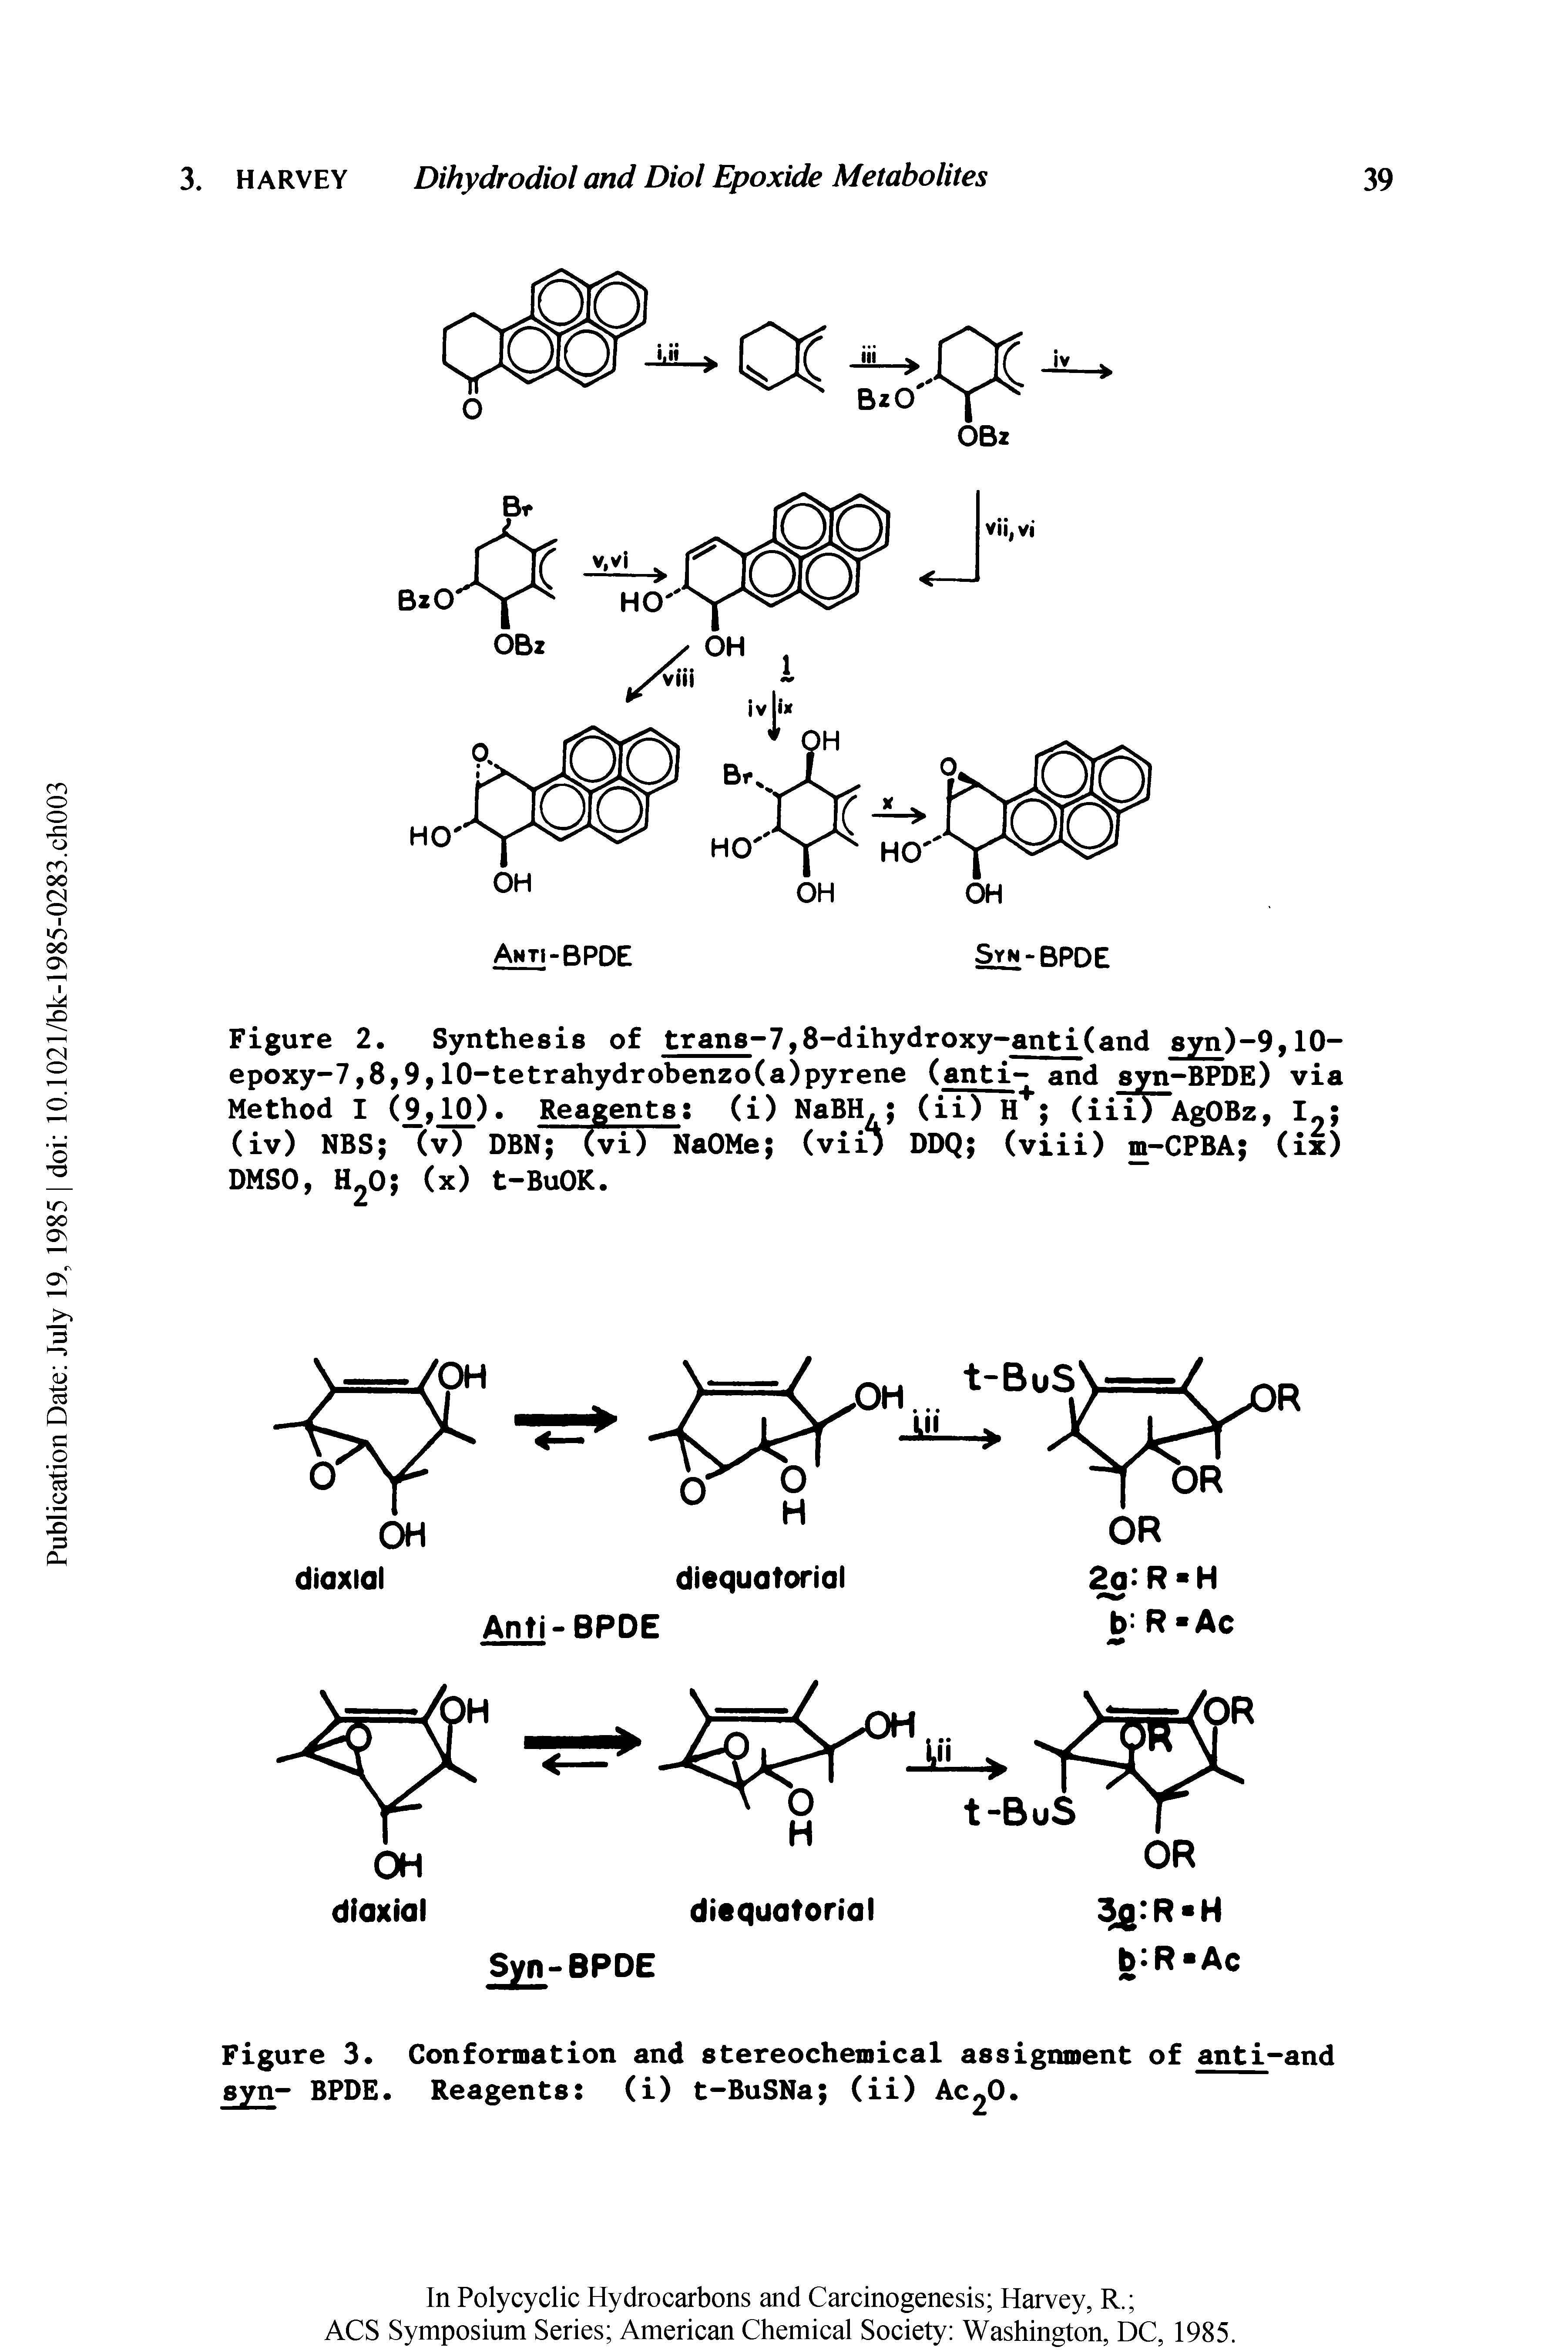 Figure 3. Conformation and stereochemical assignment of anti-and syn- BPDE. Reagents (i) t-BuSNa (ii) Ac20.